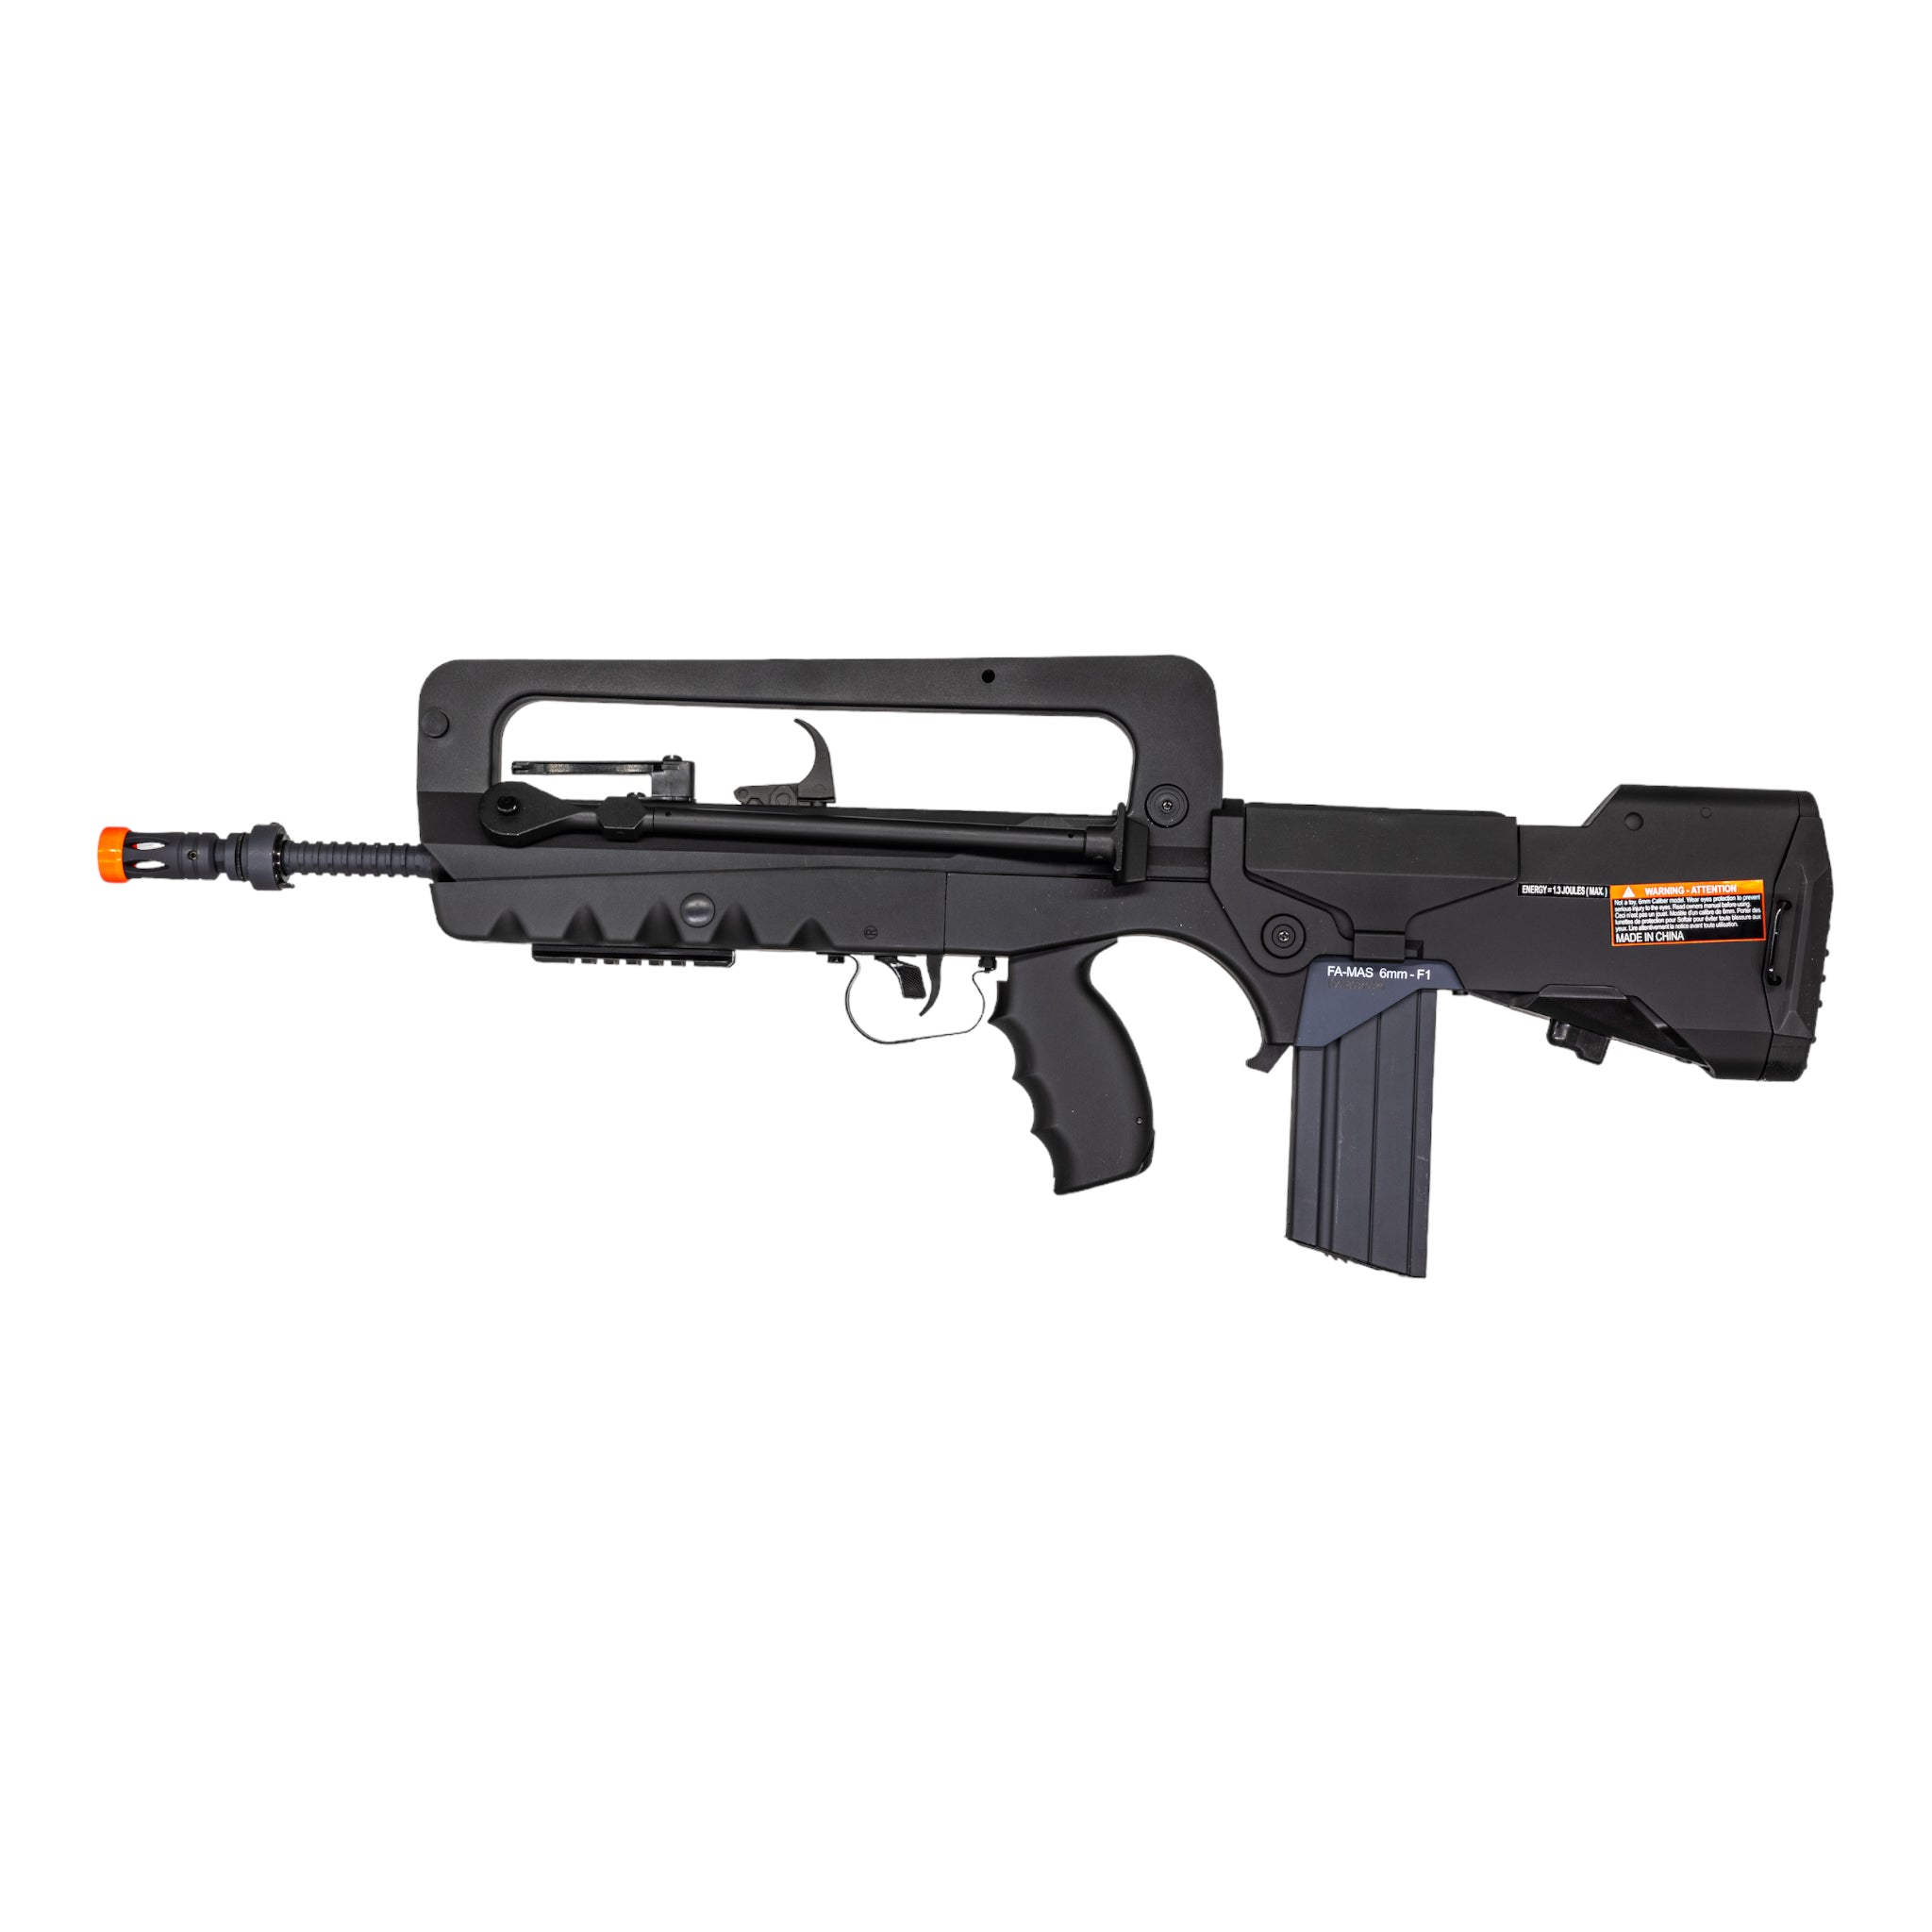 FAMAS Bullpup Airsoft AEG Rifle Fully Licensed by Cybergun (Model: F1), AEG, SS Airsoft